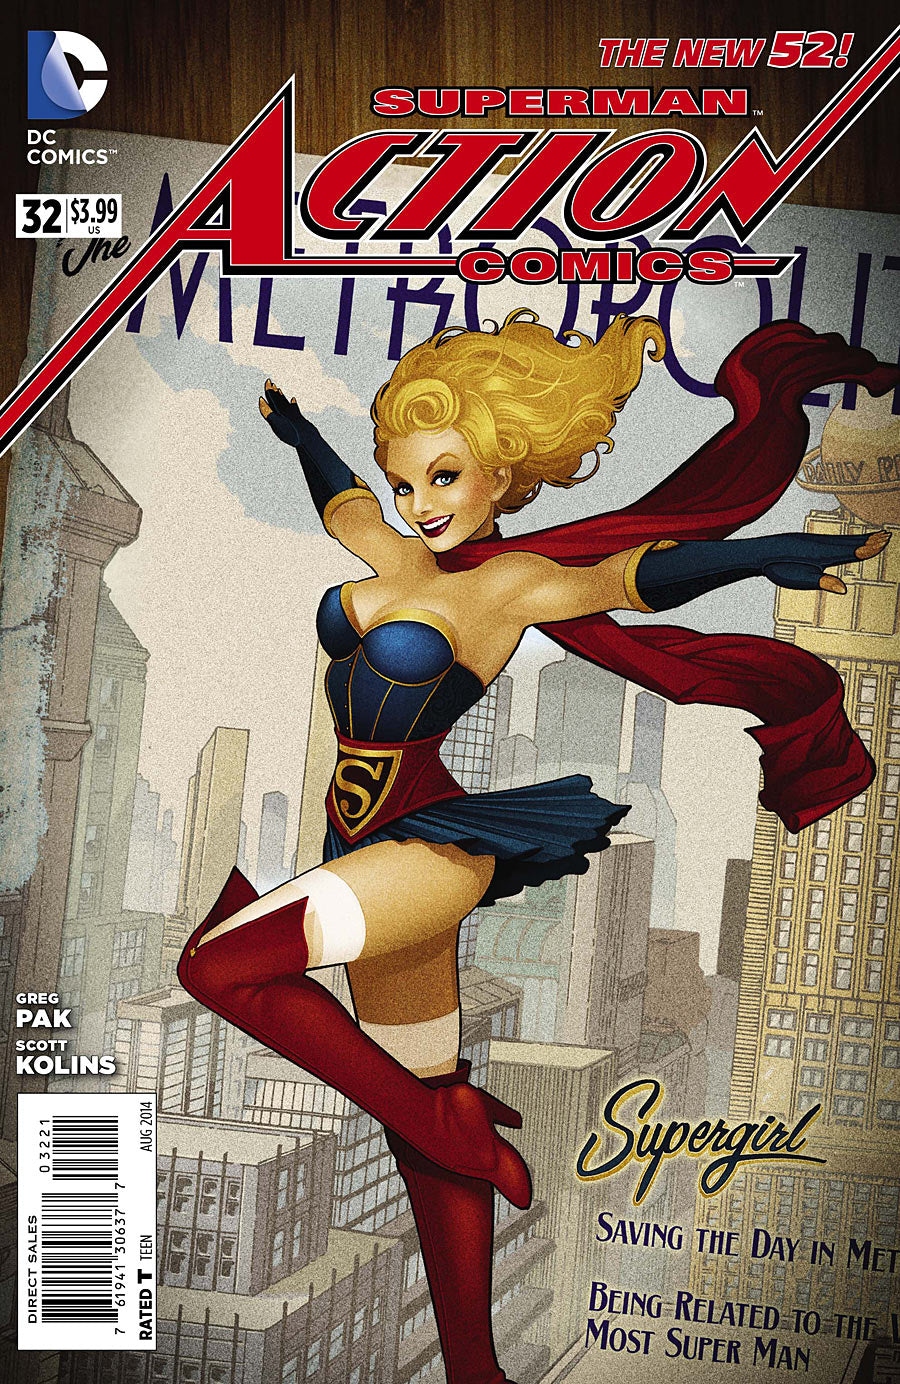 Stock Photo of Action Comics V2 #32 Bombshells Variant Edition (Doomed) comic sold by Stronghold Collectibles